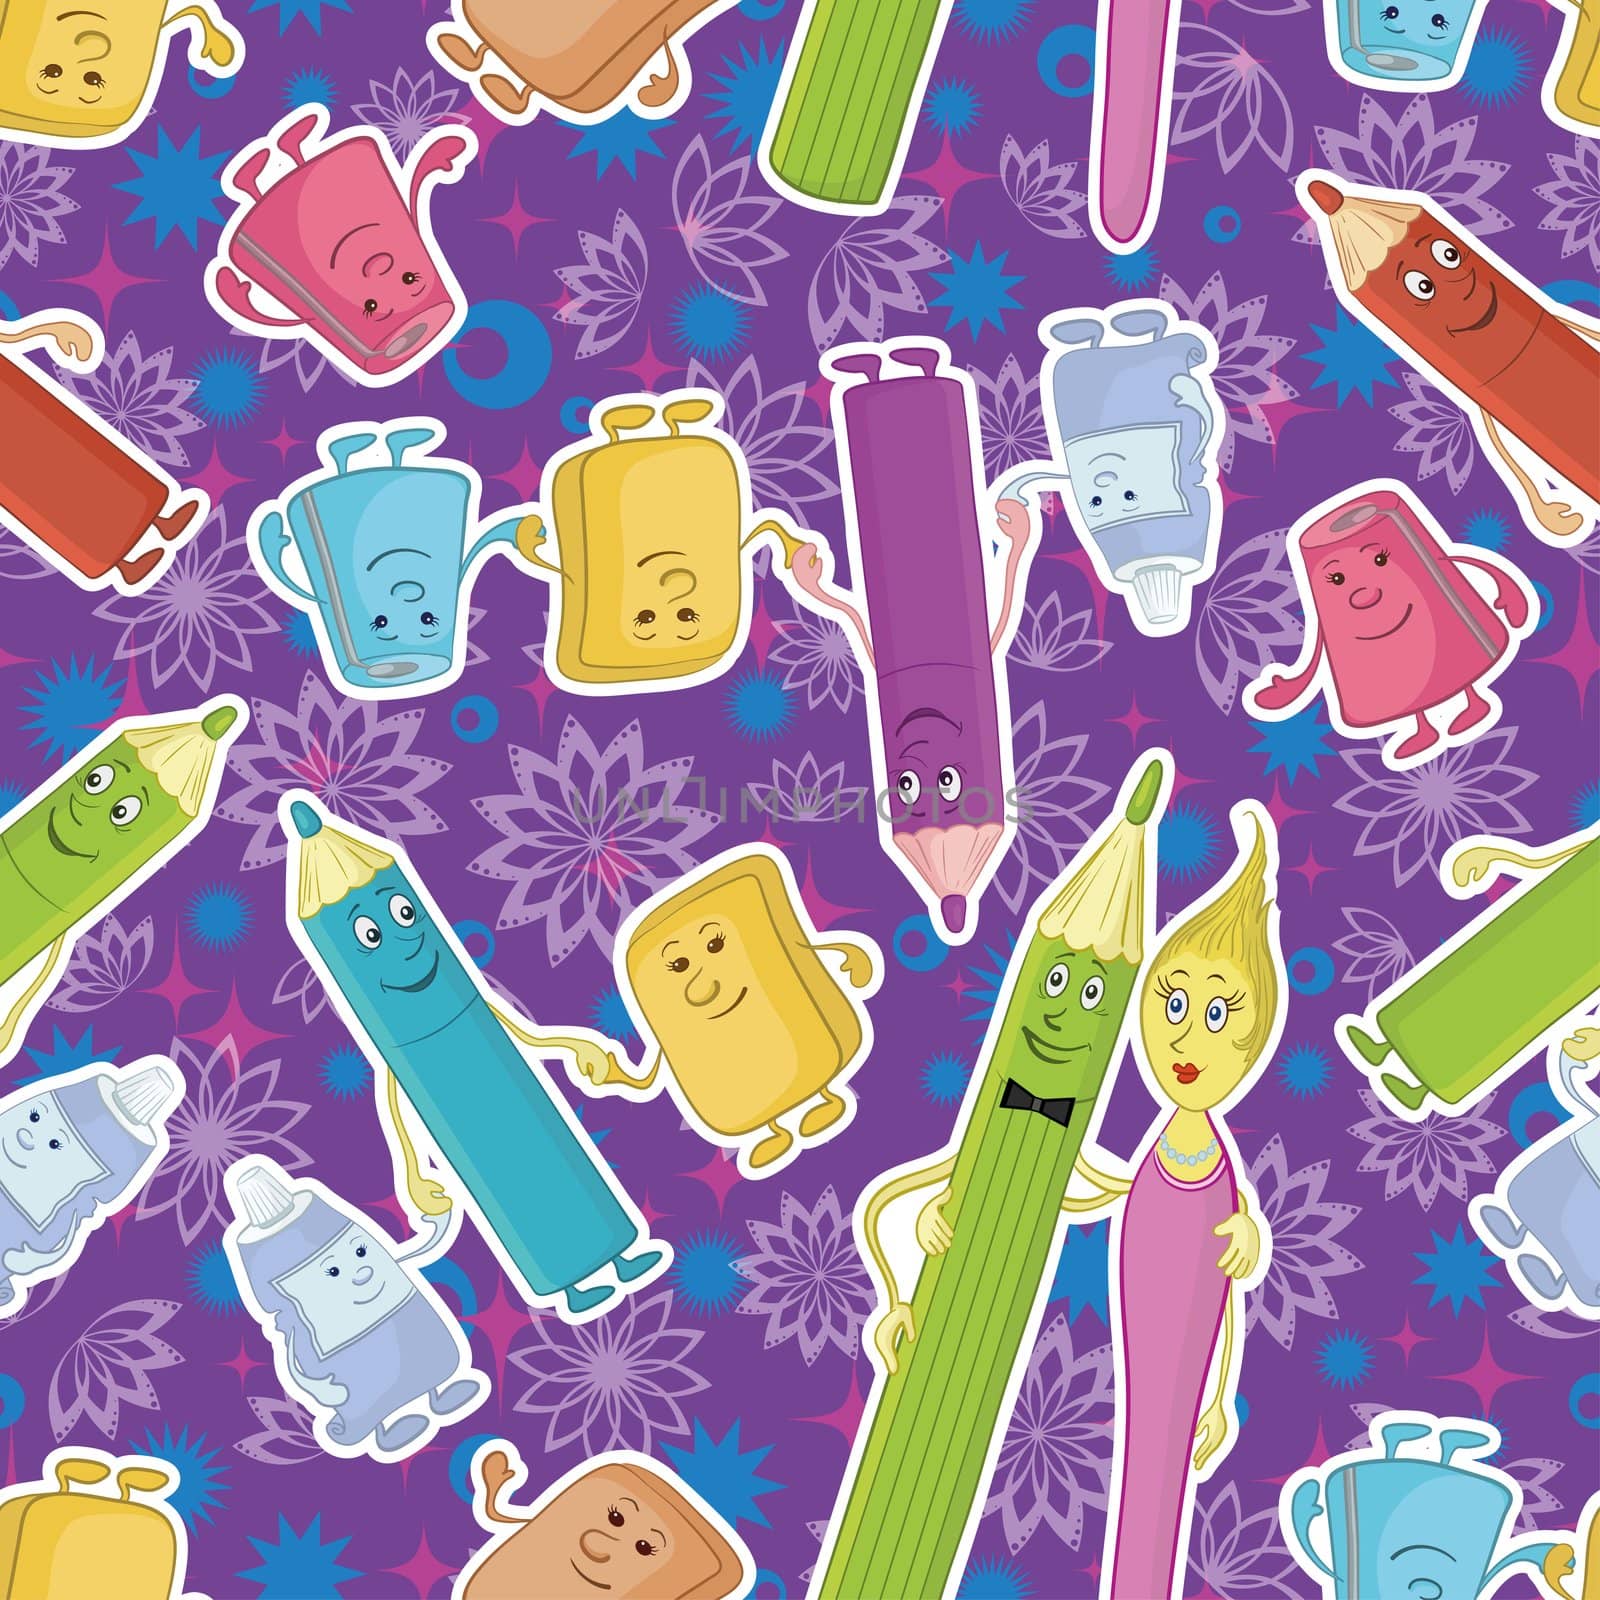 Seamless cartoon background, stationery family: pencils, brushes, tubes, erasers and pencil sharpeners.